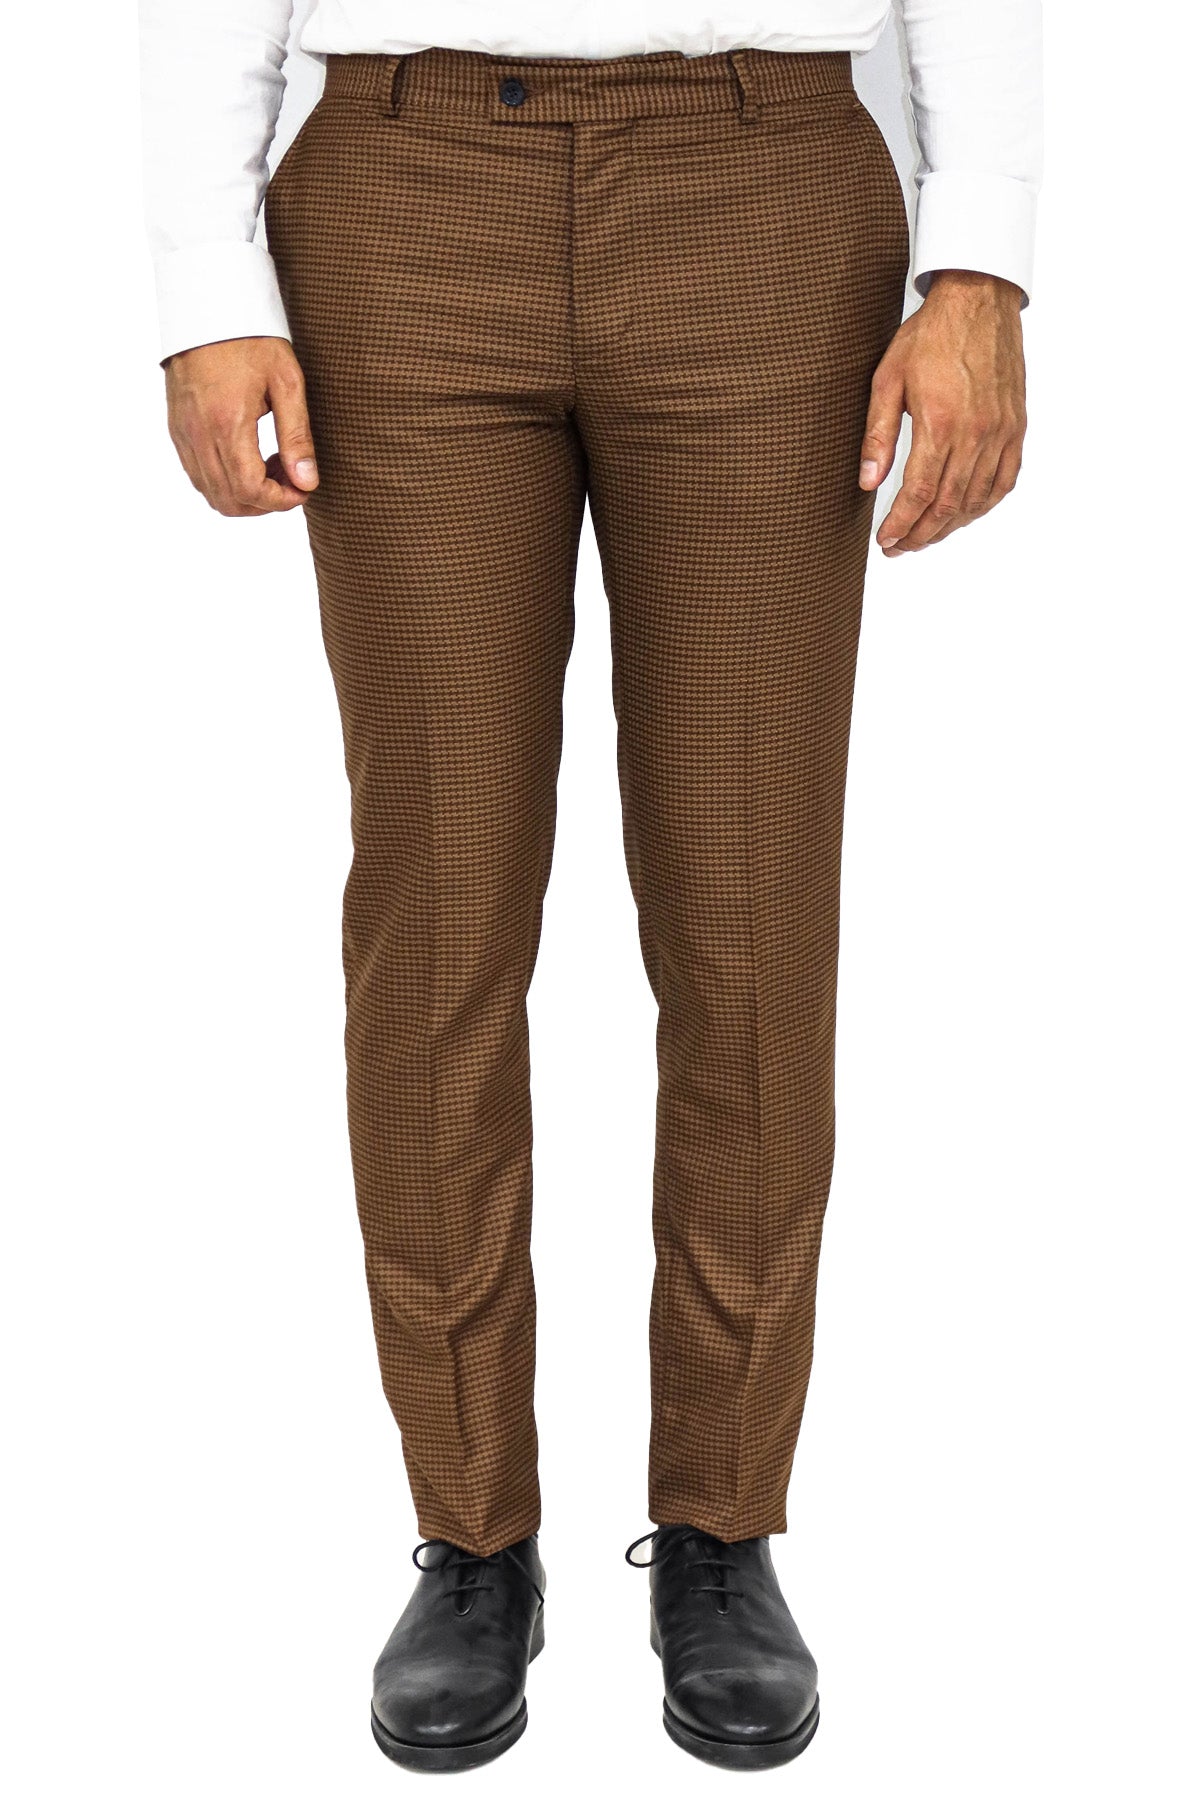 Concitor Men's Dress Pants Trousers Flat Front India | Ubuy